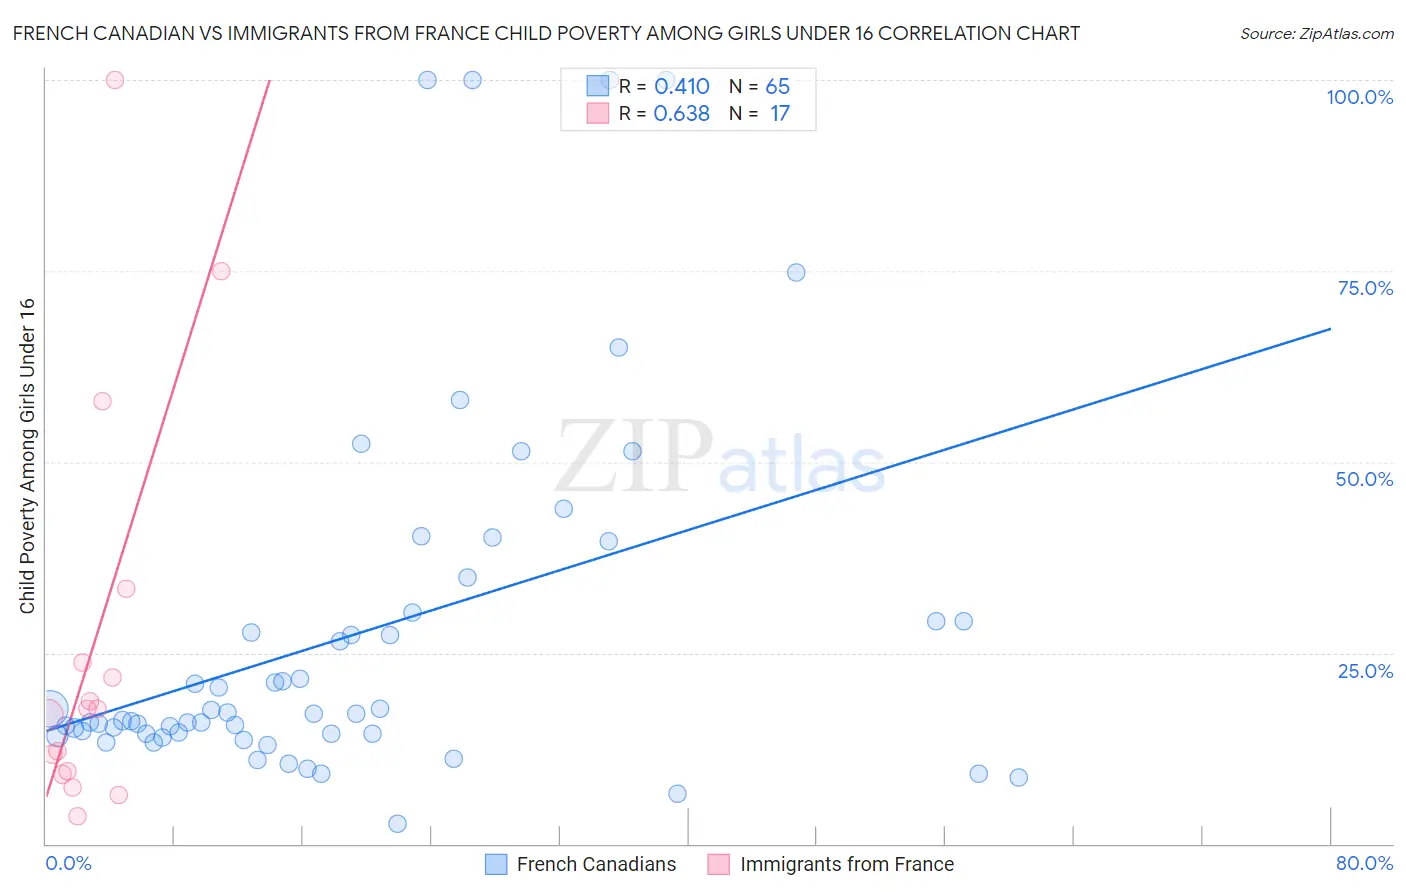 French Canadian vs Immigrants from France Child Poverty Among Girls Under 16